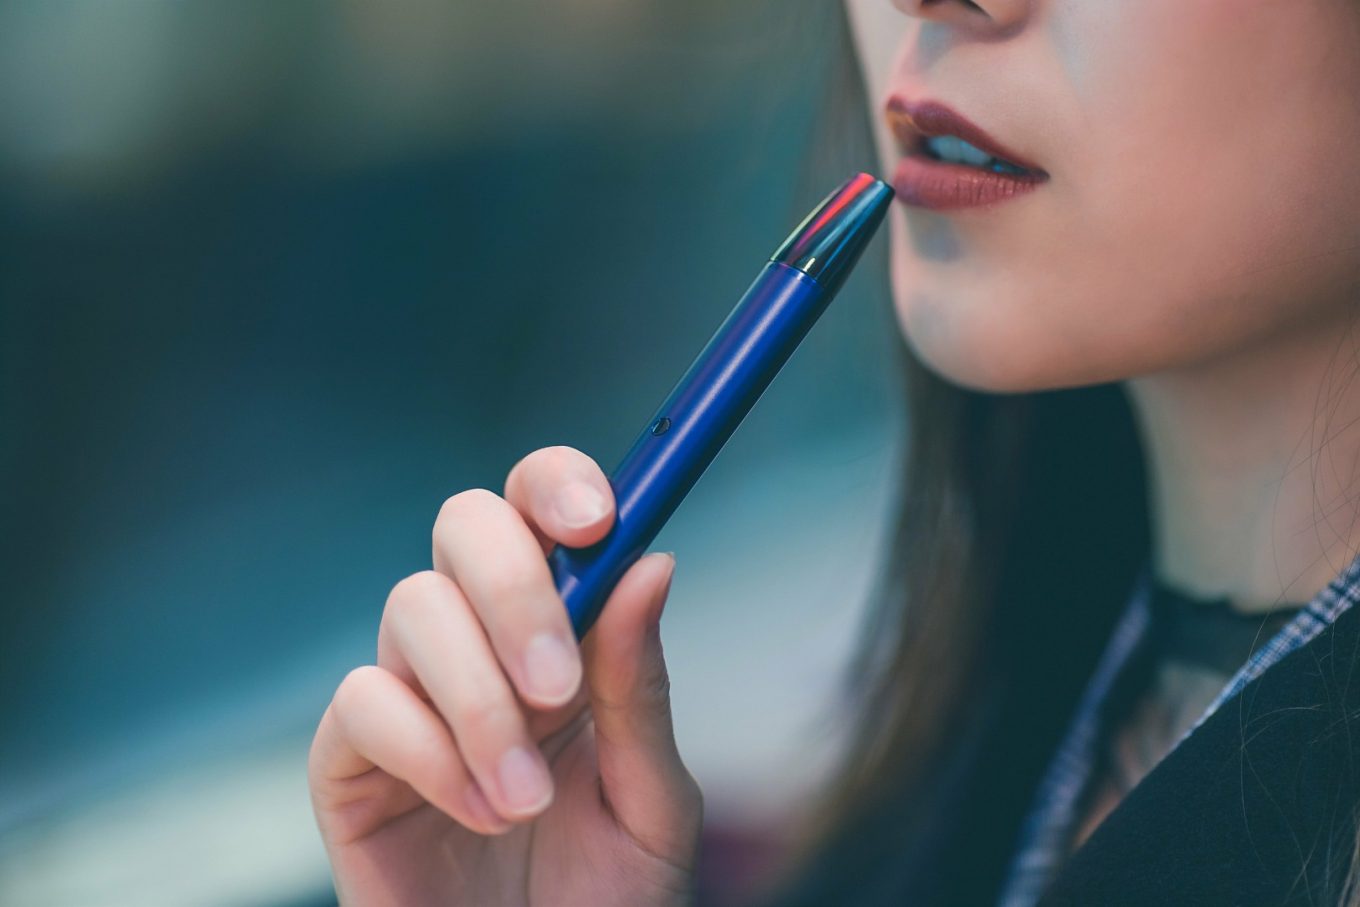 What the experts say: Why vaping is better than smoking